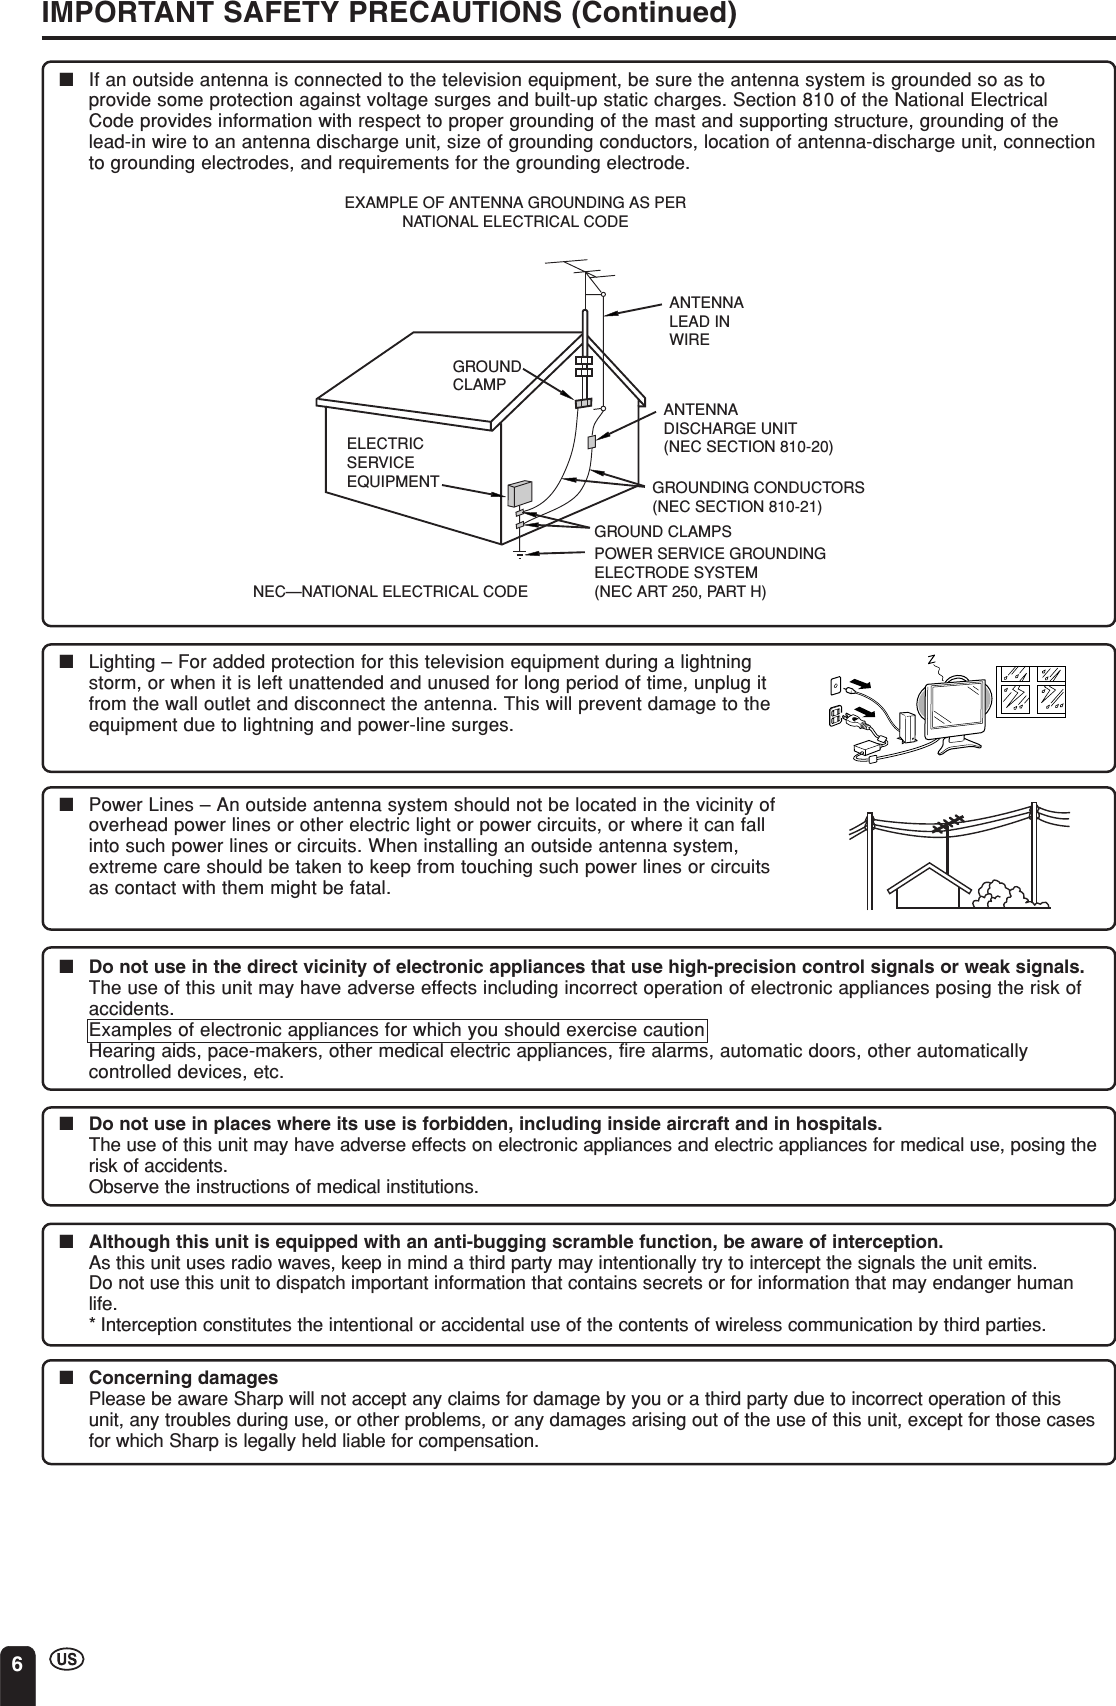 6IMPORTANT SAFETY PRECAUTIONS (Continued)■If an outside antenna is connected to the television equipment, be sure the antenna system is grounded so as toprovide some protection against voltage surges and built-up static charges. Section 810 of the National ElectricalCode provides information with respect to proper grounding of the mast and supporting structure, grounding of thelead-in wire to an antenna discharge unit, size of grounding conductors, location of antenna-discharge unit, connectionto grounding electrodes, and requirements for the grounding electrode.ANTENNALEAD INWIREANTENNADISCHARGE UNIT(NEC SECTION 810-20)GROUNDING CONDUCTORS(NEC SECTION 810-21)GROUND CLAMPSPOWER SERVICE GROUNDINGELECTRODE SYSTEM(NEC ART 250, PART H)ELECTRICSERVICEEQUIPMENTNEC—NATIONAL ELECTRICAL CODEGROUNDCLAMPEXAMPLE OF ANTENNA GROUNDING AS PERNATIONAL ELECTRICAL CODE■Do not use in the direct vicinity of electronic appliances that use high-precision control signals or weak signals.The use of this unit may have adverse effects including incorrect operation of electronic appliances posing the risk ofaccidents.Examples of electronic appliances for which you should exercise cautionHearing aids, pace-makers, other medical electric appliances, fire alarms, automatic doors, other automaticallycontrolled devices, etc.■Do not use in places where its use is forbidden, including inside aircraft and in hospitals.The use of this unit may have adverse effects on electronic appliances and electric appliances for medical use, posing therisk of accidents.Observe the instructions of medical institutions.■Although this unit is equipped with an anti-bugging scramble function, be aware of interception.As this unit uses radio waves, keep in mind a third party may intentionally try to intercept the signals the unit emits.Do not use this unit to dispatch important information that contains secrets or for information that may endanger humanlife.* Interception constitutes the intentional or accidental use of the contents of wireless communication by third parties.■Concerning damagesPlease be aware Sharp will not accept any claims for damage by you or a third party due to incorrect operation of thisunit, any troubles during use, or other problems, or any damages arising out of the use of this unit, except for those casesfor which Sharp is legally held liable for compensation.■Power Lines – An outside antenna system should not be located in the vicinity ofoverhead power lines or other electric light or power circuits, or where it can fallinto such power lines or circuits. When installing an outside antenna system,extreme care should be taken to keep from touching such power lines or circuitsas contact with them might be fatal.■Lighting – For added protection for this television equipment during a lightningstorm, or when it is left unattended and unused for long period of time, unplug itfrom the wall outlet and disconnect the antenna. This will prevent damage to theequipment due to lightning and power-line surges.